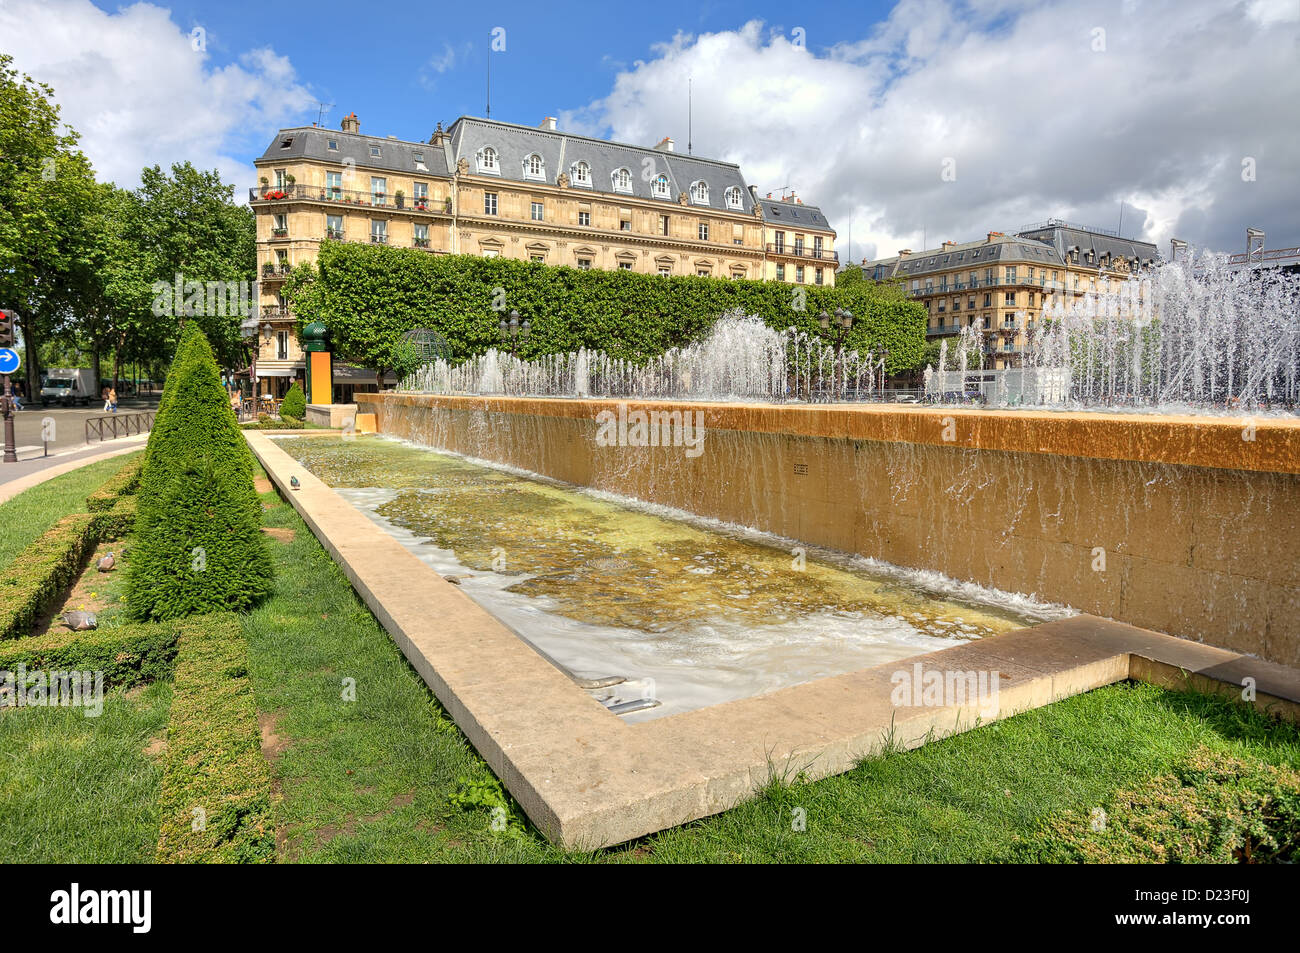 Fountains, green lawns and typical parisian building around famous Hotel de Ville in Paris, France. Stock Photo